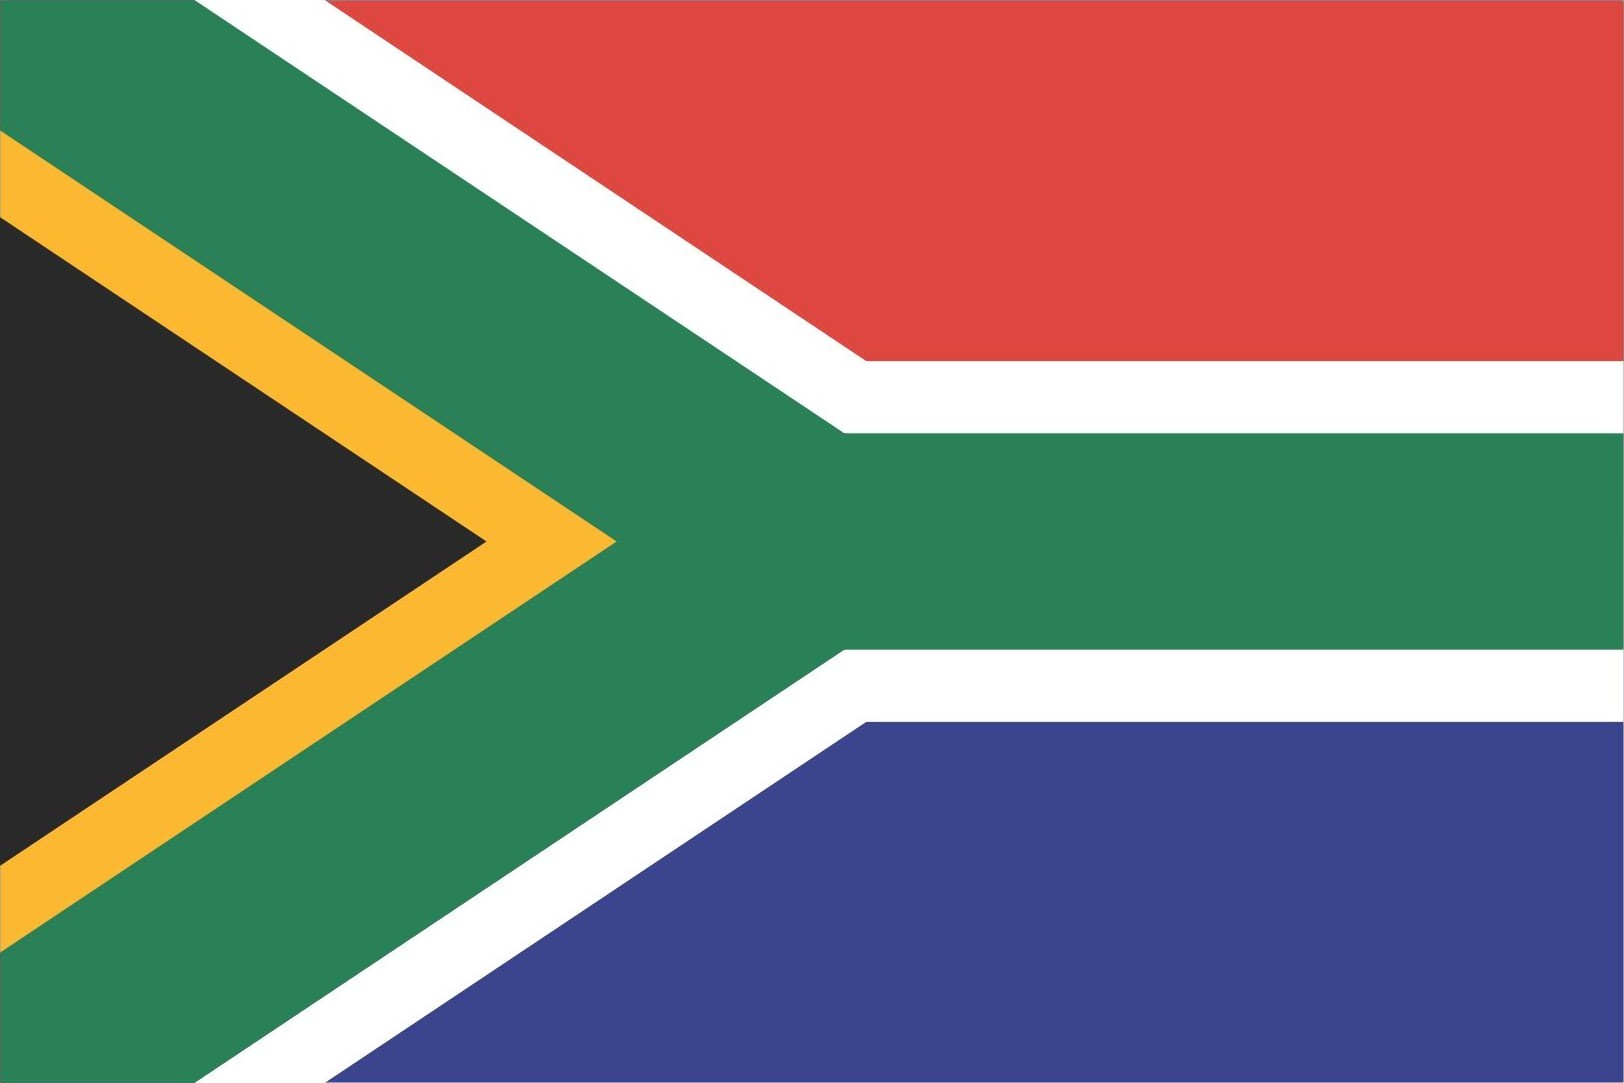 South Africa Flag and Emblem [south african]